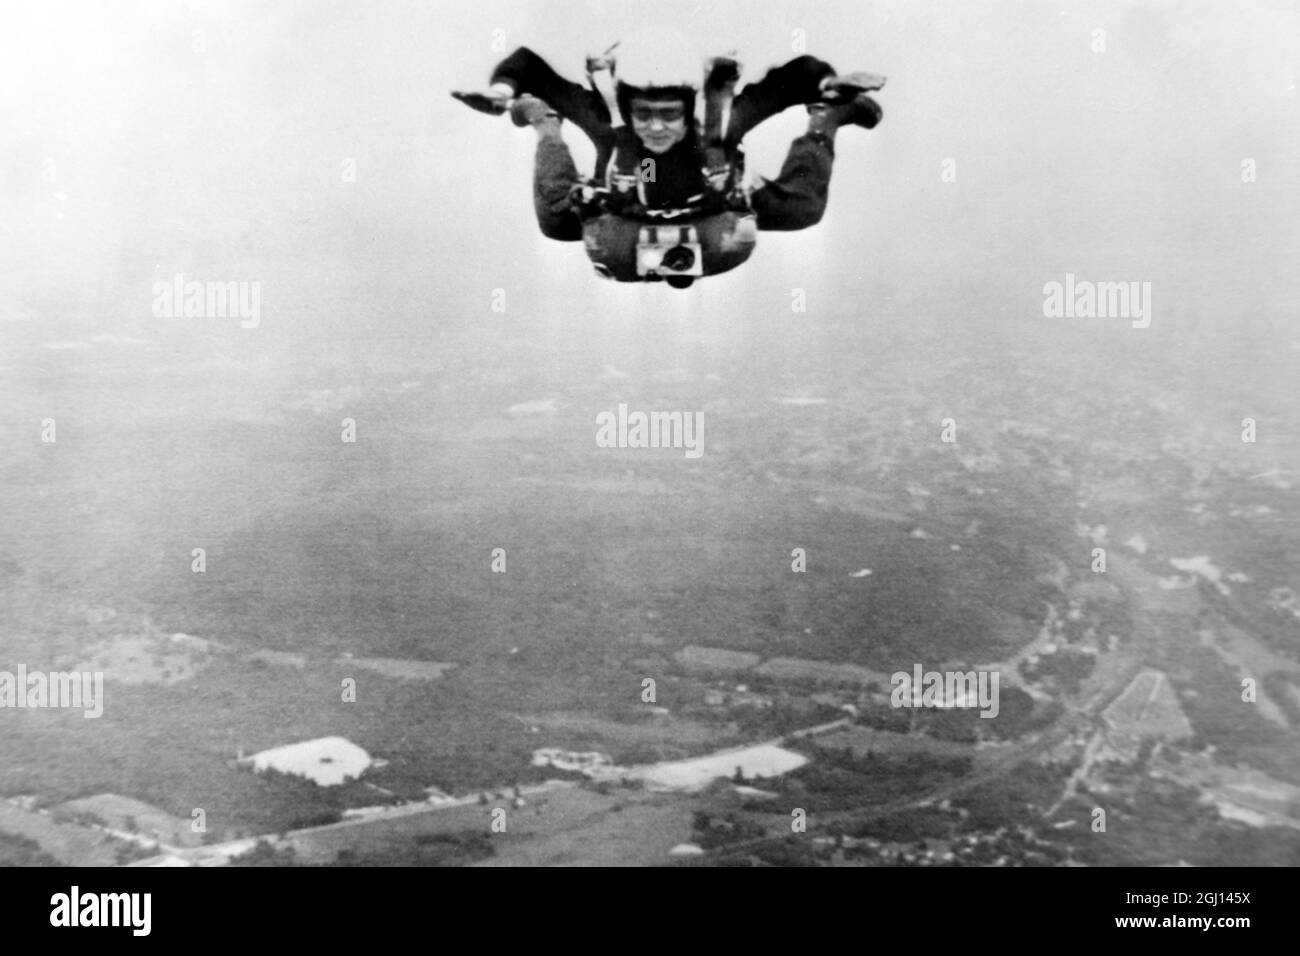 8 JULY 1962 KIM EMMONS DURING A PRACTICE JUMP IN PREPARATION FOR THE WORLD SKY DIVING CHAMPIONSHIPS. THE PHOTOGRAPHER, LEWIS SANBORN, WAS ALSO IN FREEFALL AND USED A NIKON ELECTRIC DRIVE CAMERA MOUNTED IN HIS HELMET WITH A FIXED FOCUS OF 12 FEET. ORANGE, MASSACHUSETTS, USA. Stock Photo